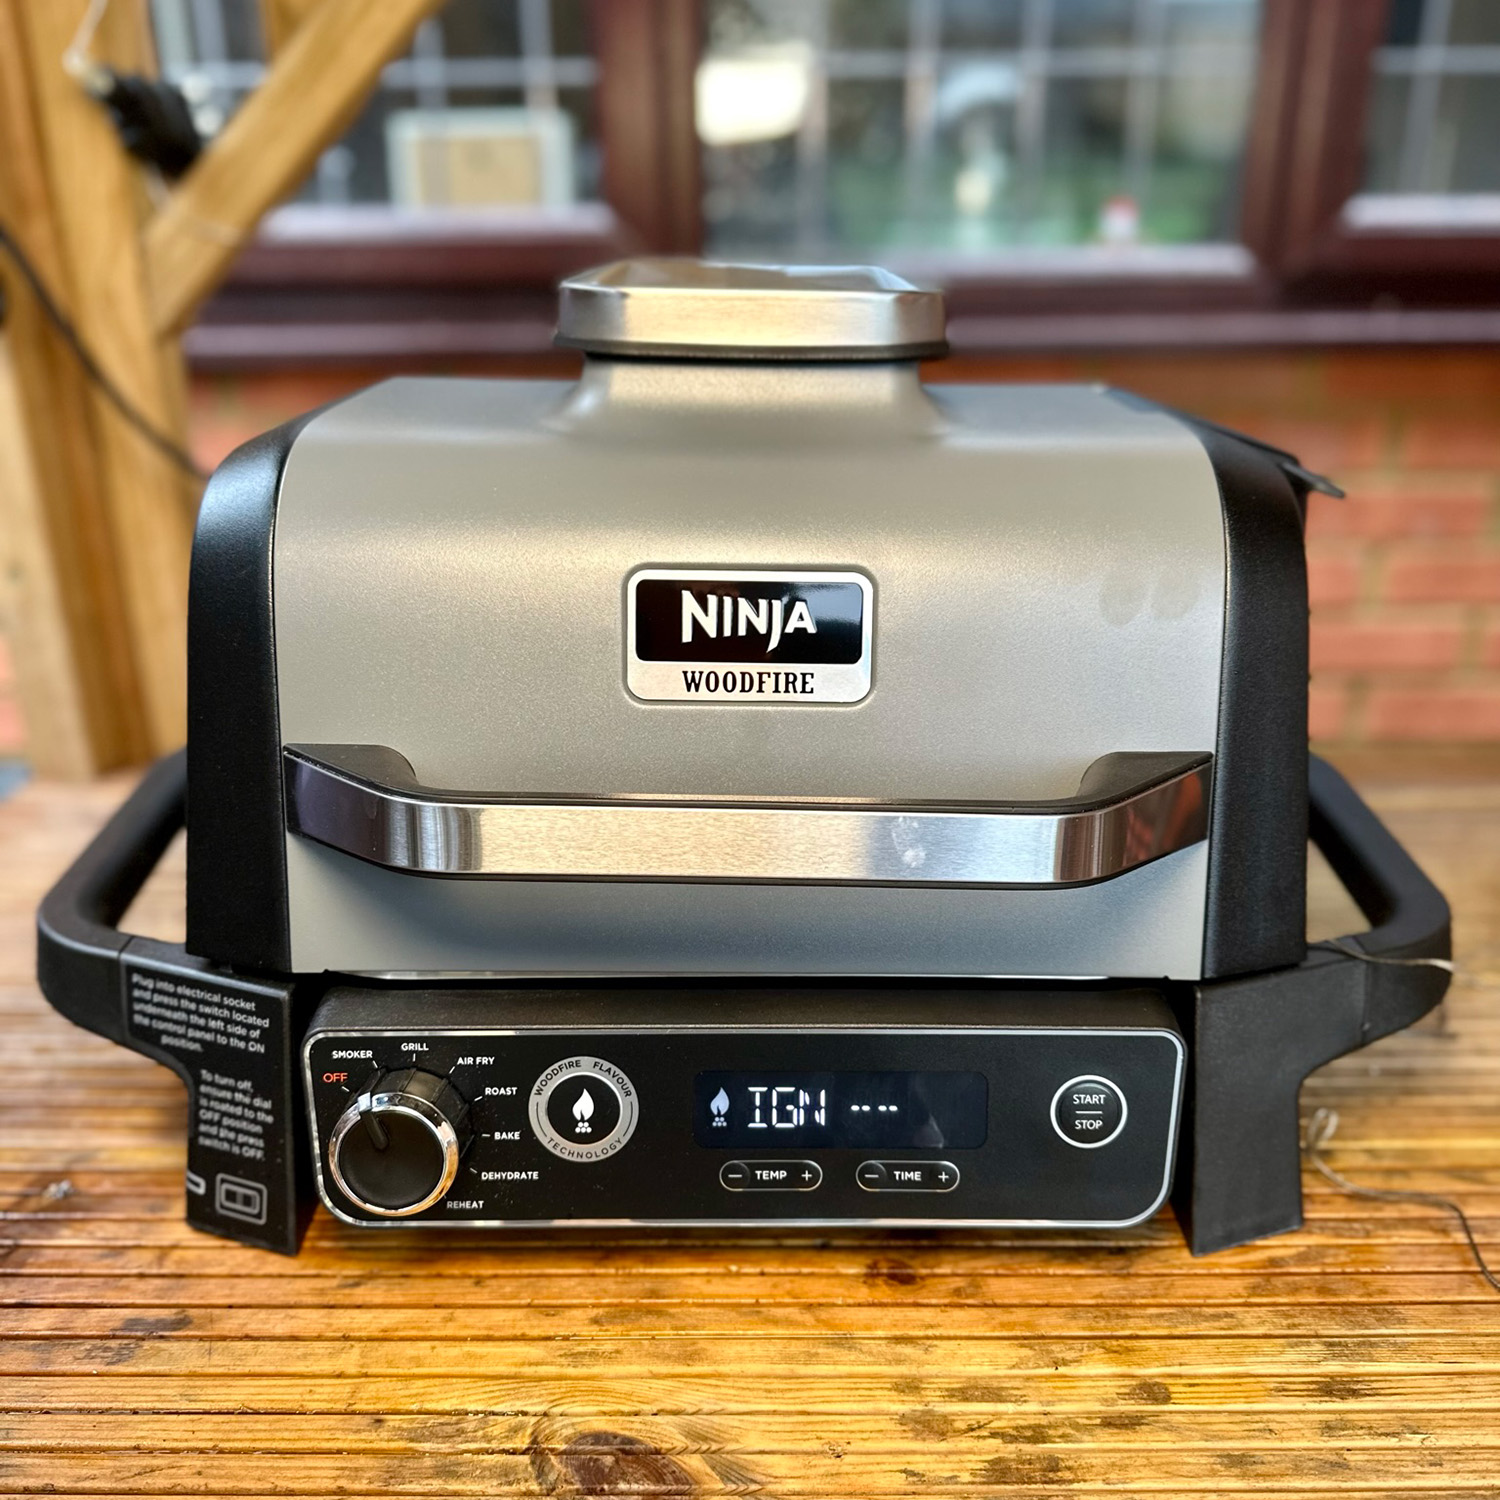 Ninja Woodfire Grill Review: The Compact Powerhouse with a Smoky